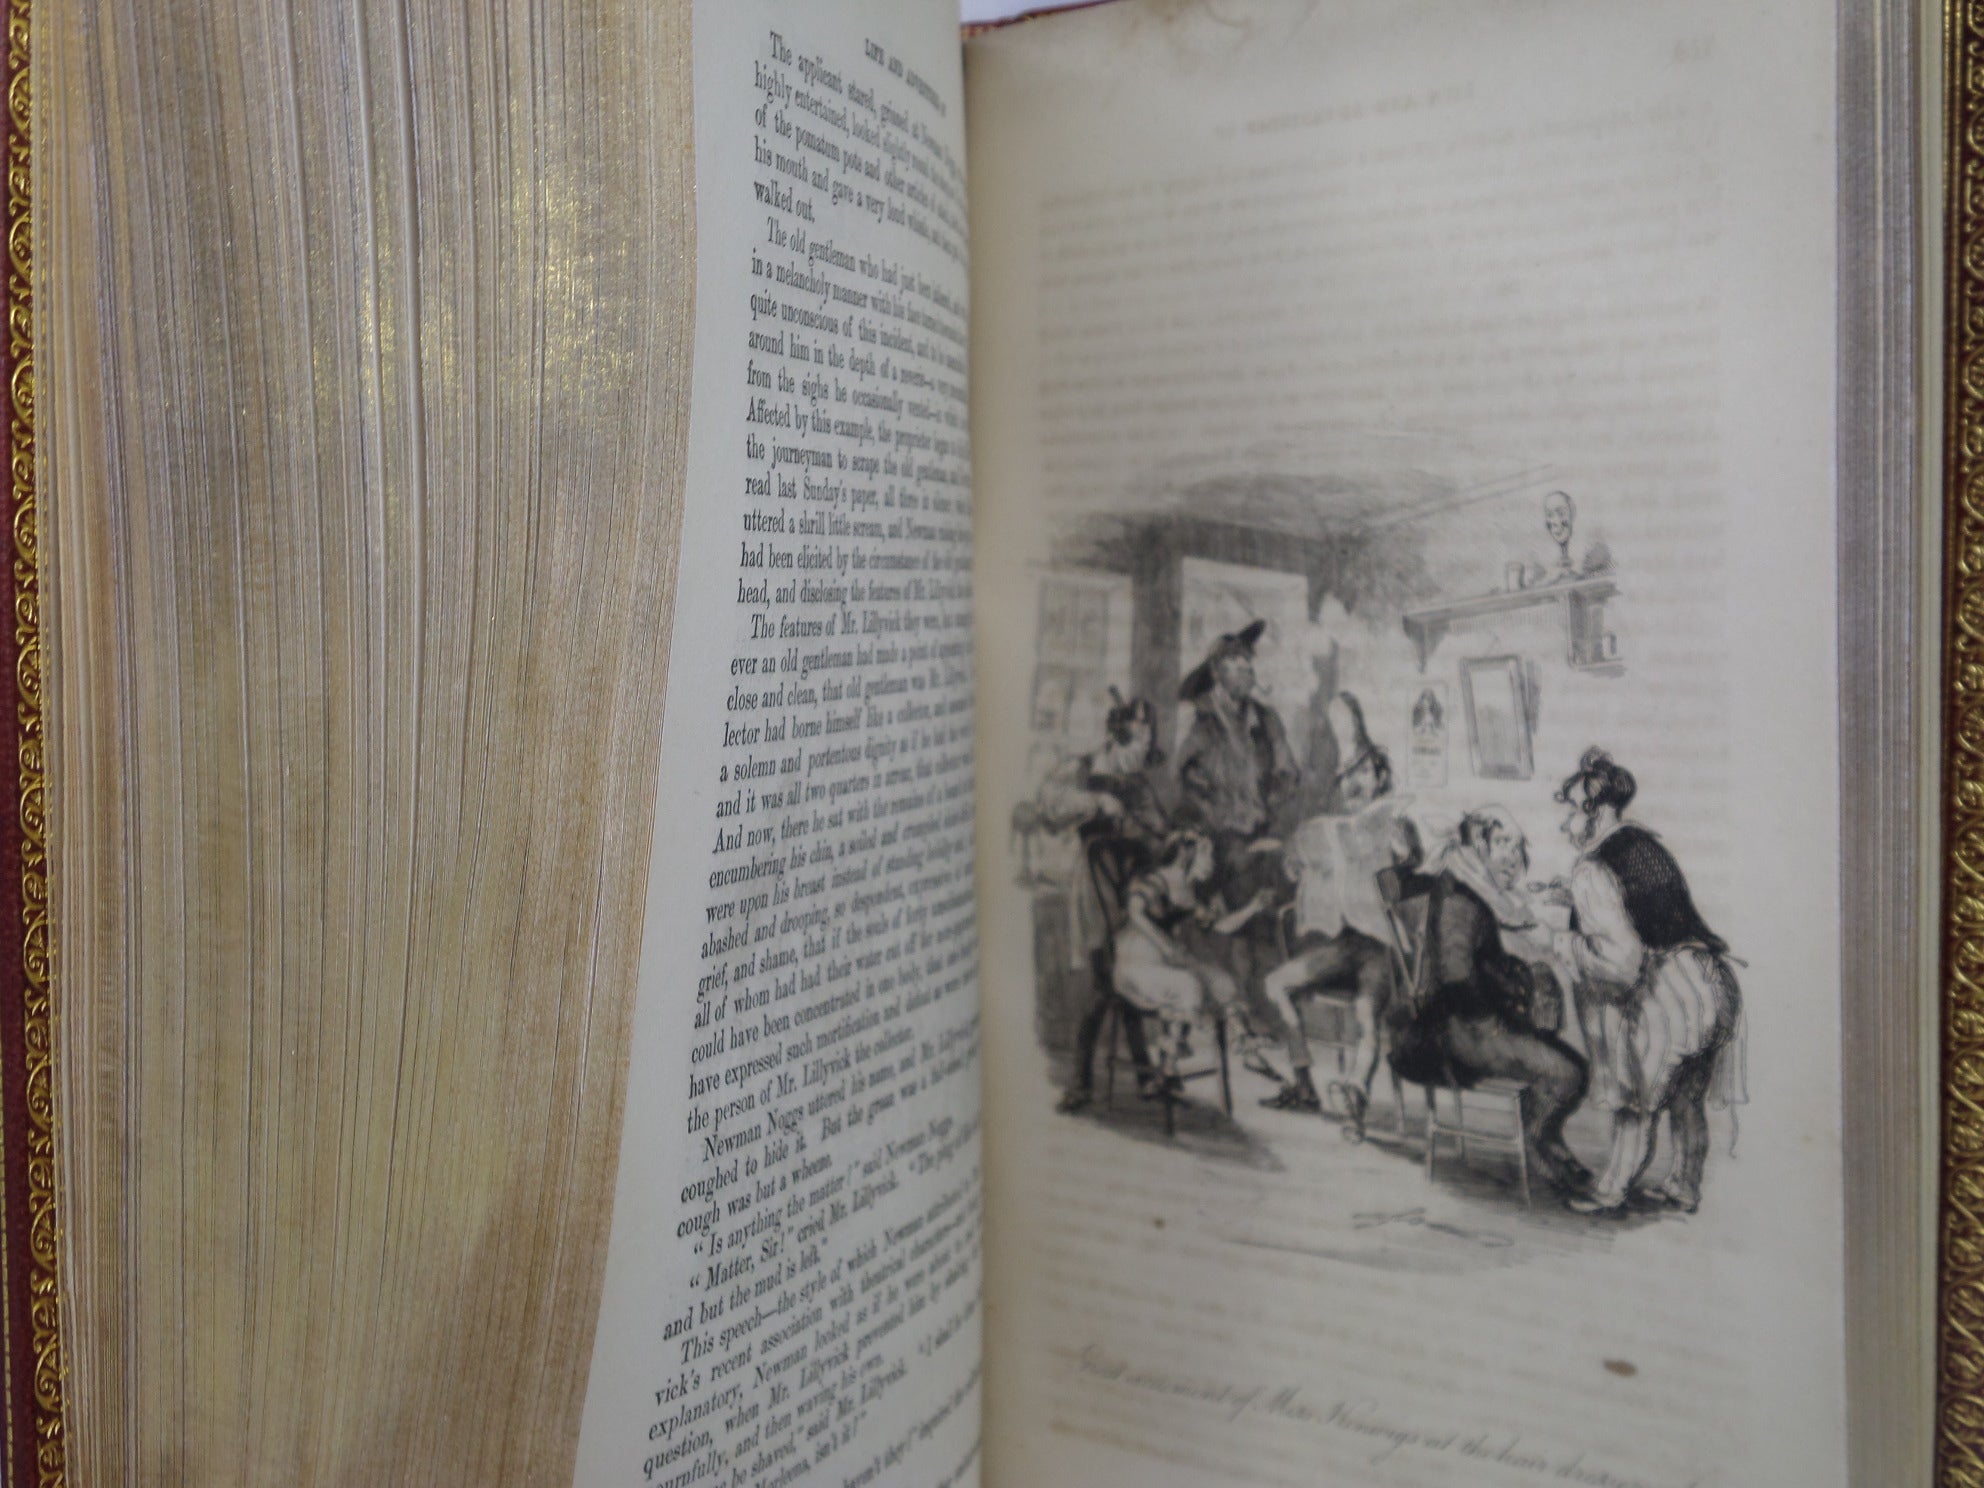 THE LIFE AND ADVENTURES OF NICHOLAS NICKLEBY BY CHARLES DICKENS 1839 FIRST EDITION, FINE BINDING BY BRIAN FROST & CO.